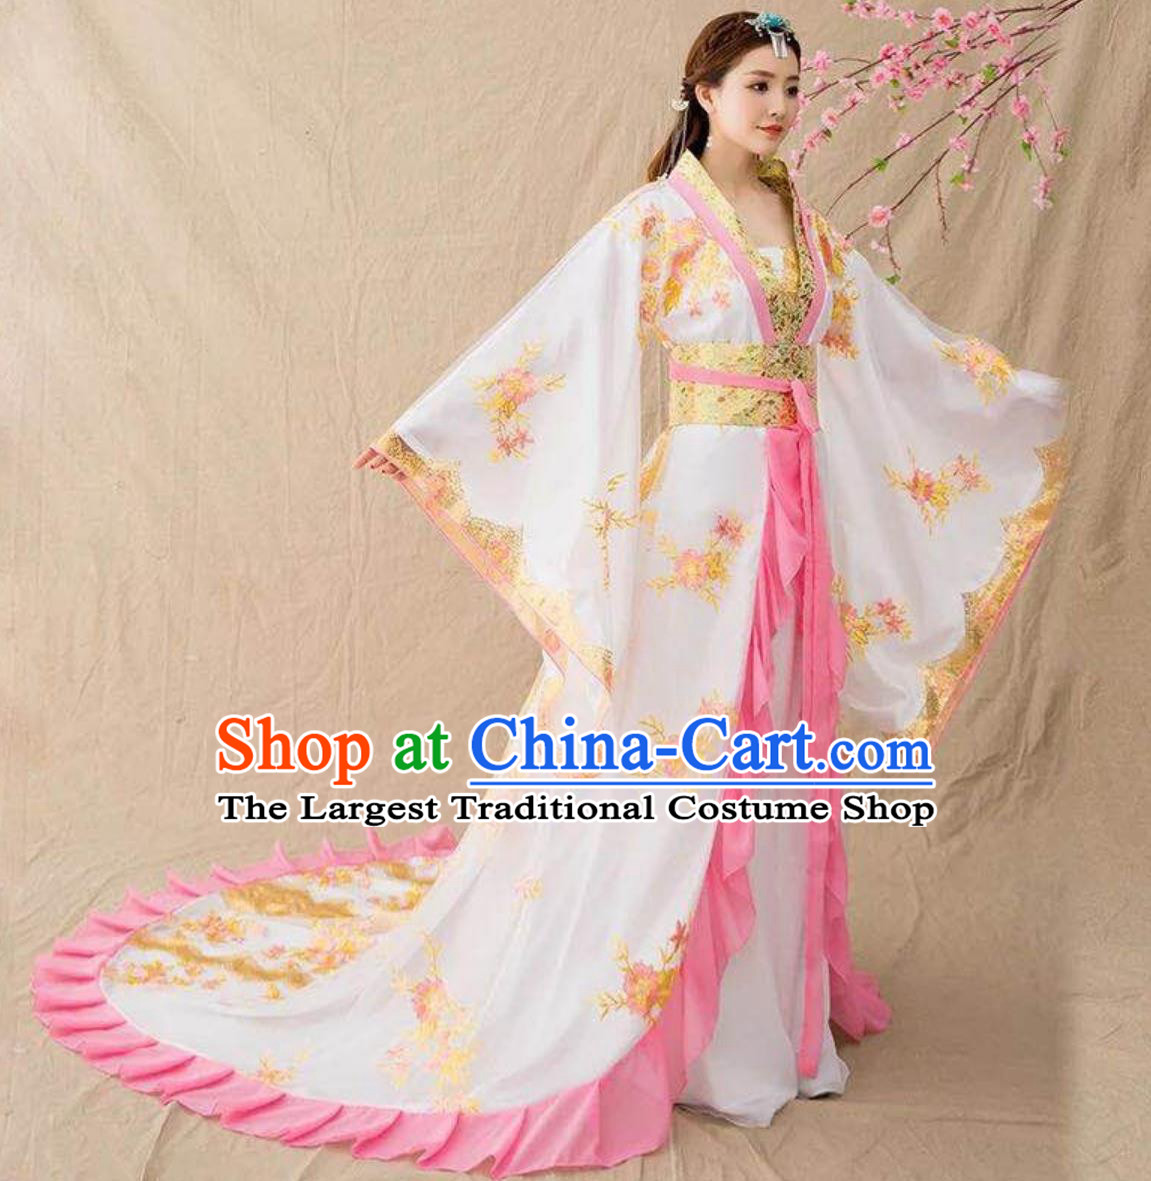 Ancient Chinese Tang Dynasty Imperial Concubine Costume White Long Tail Dress Online Buy Traditional Hanfu Empress Clothing